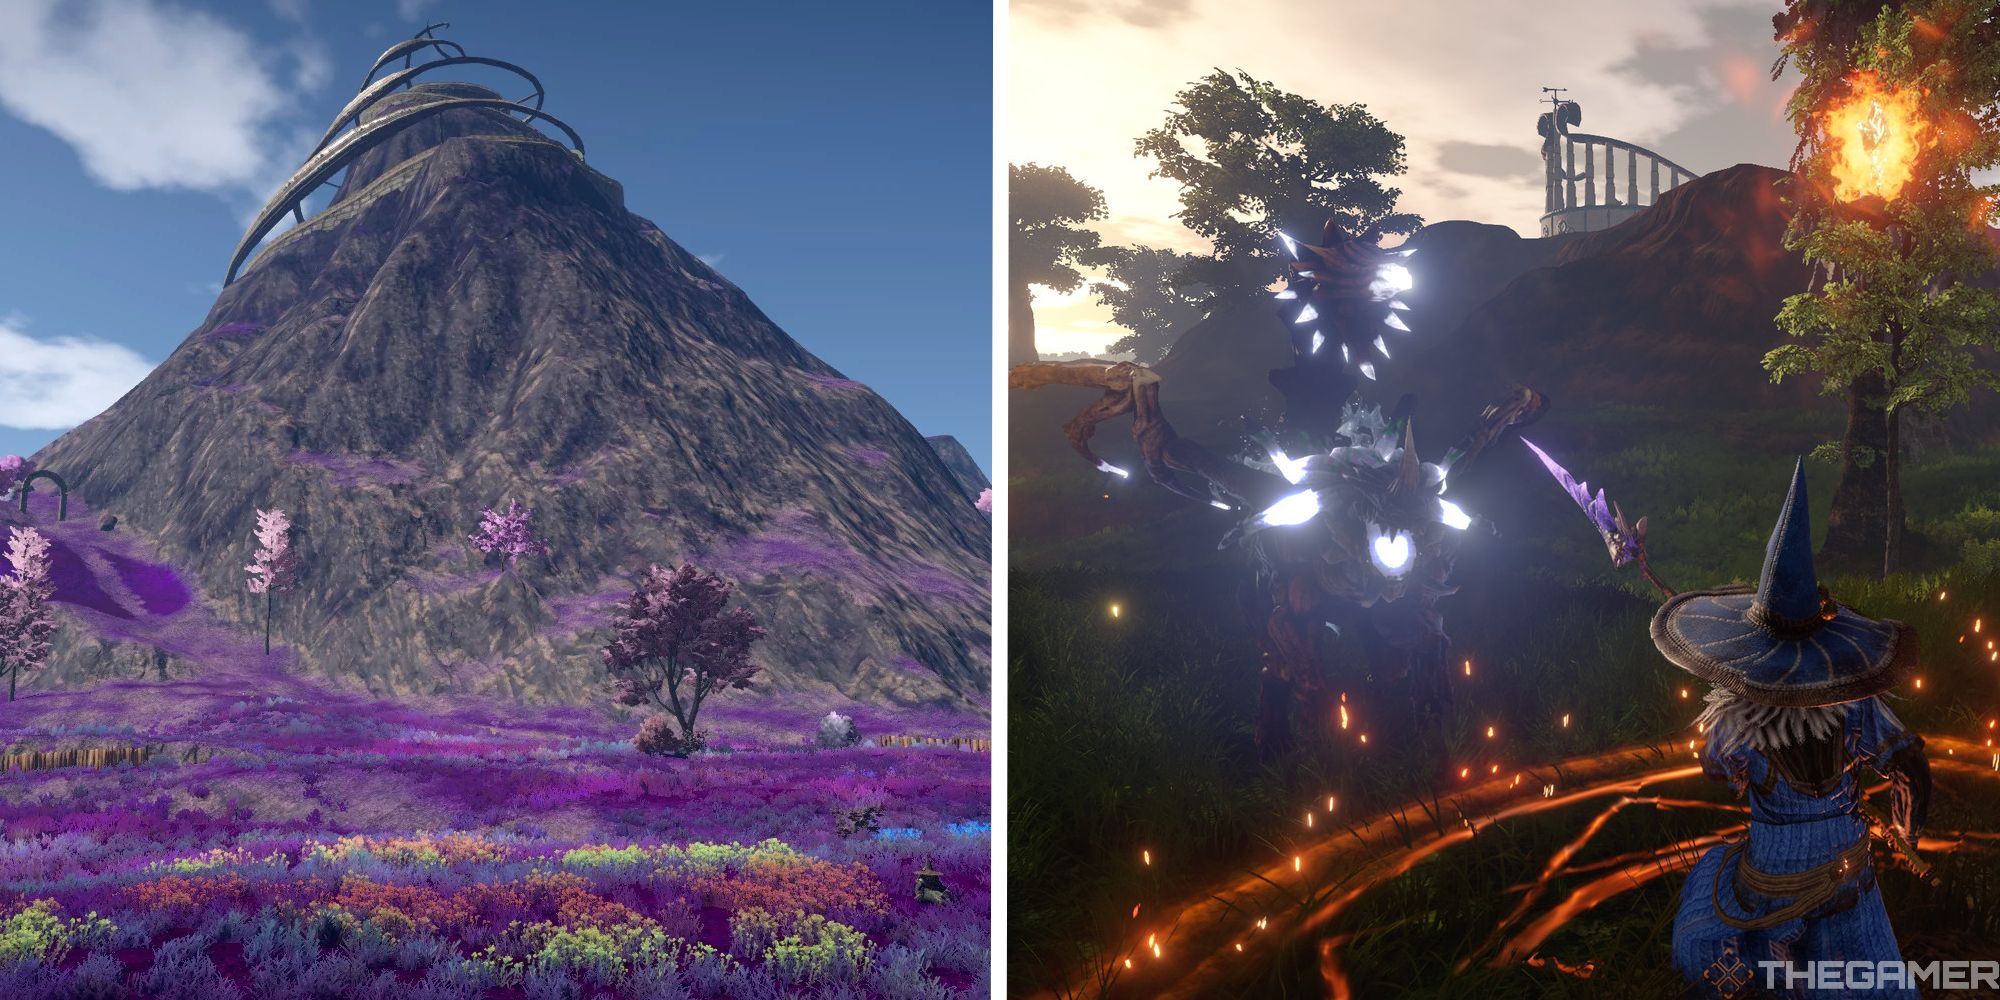 image of conflux mountain next to image of mage player in combat